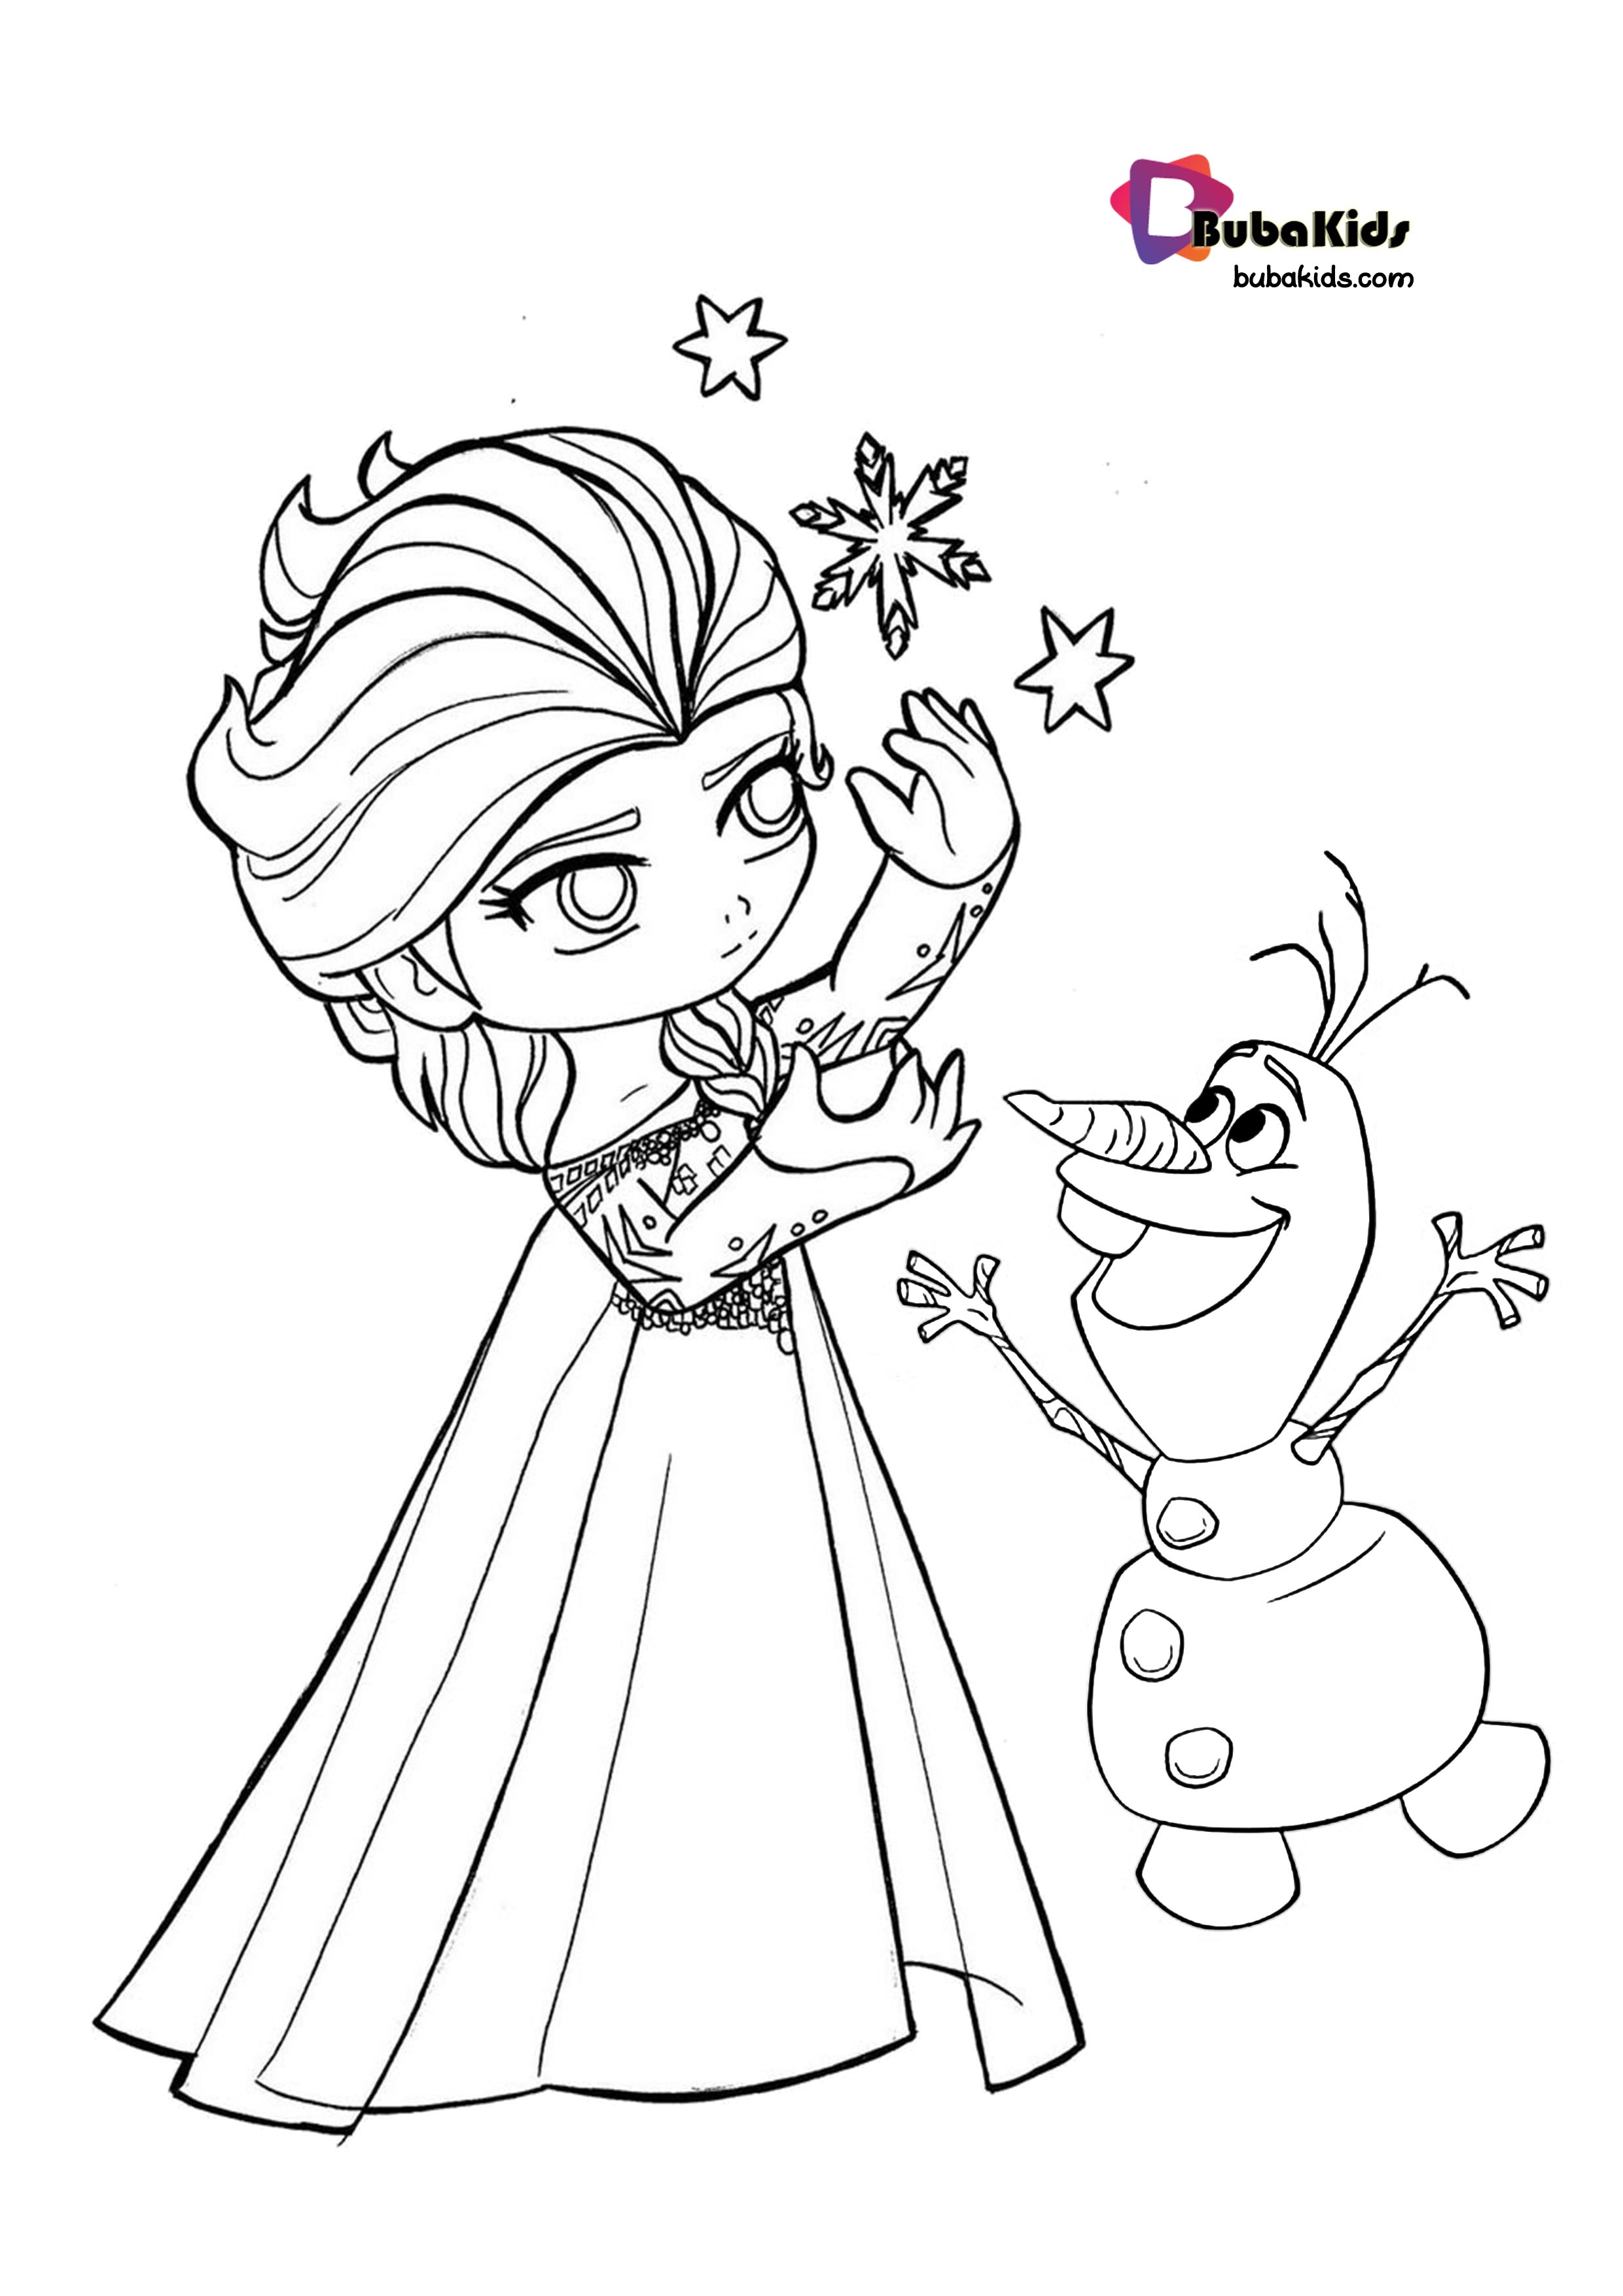 Little Princess Anna Coloring Page Wallpaper